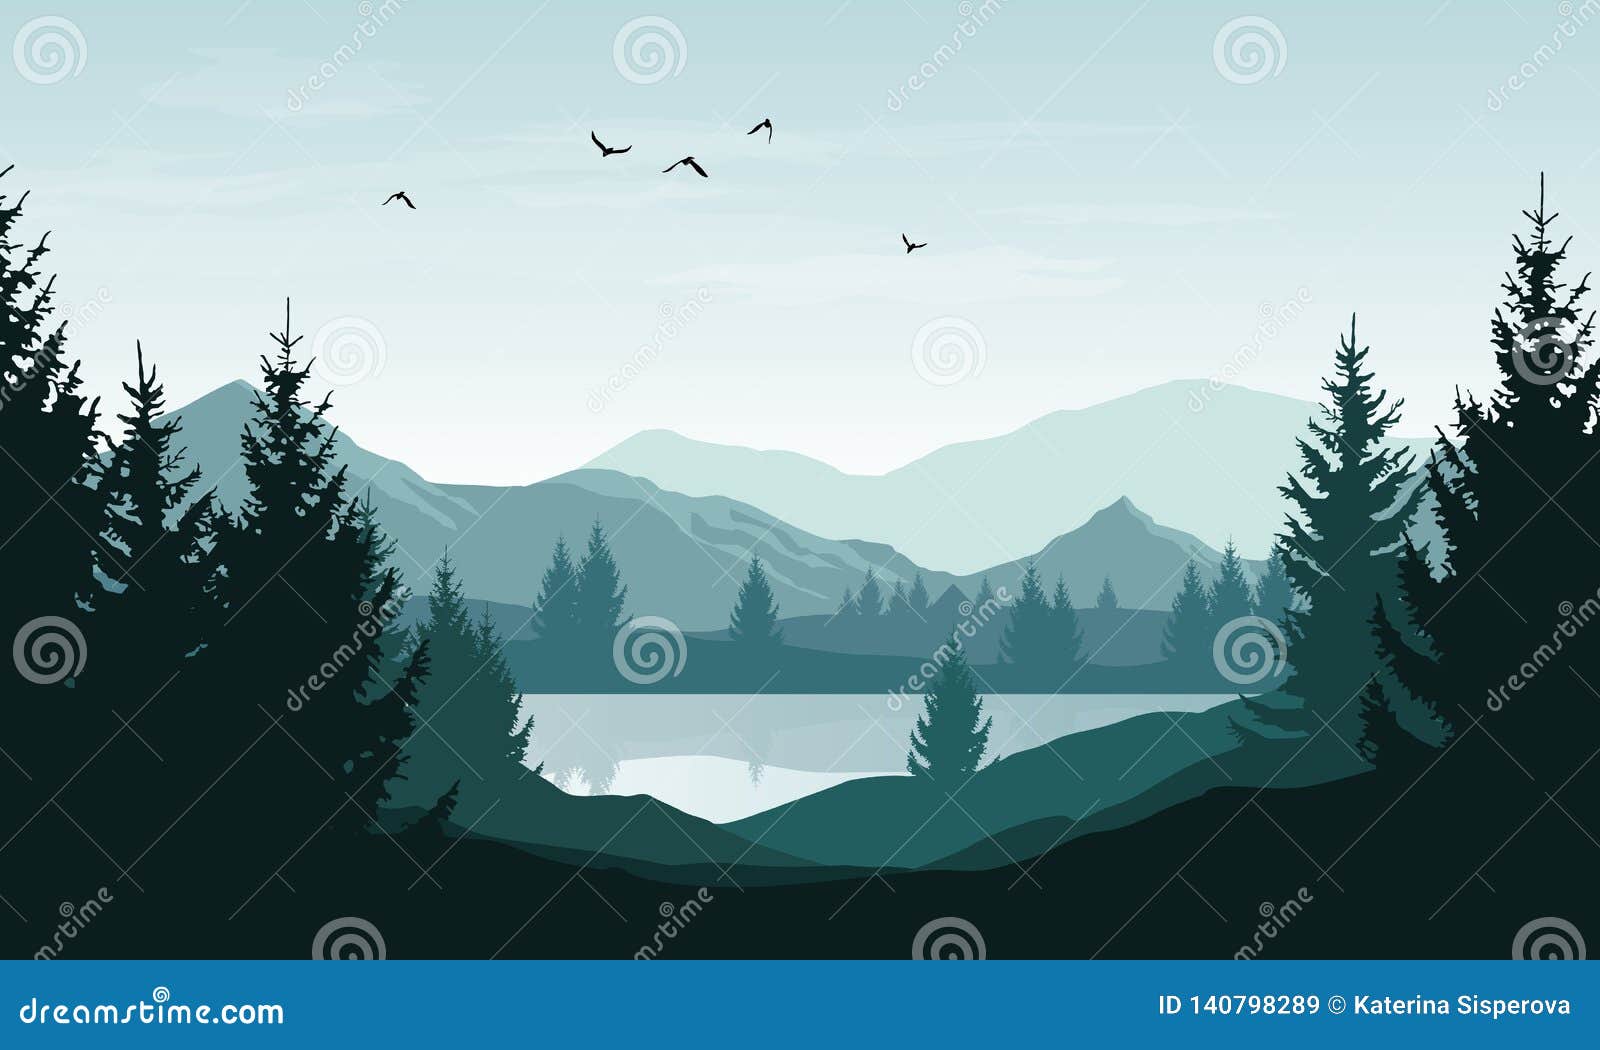  landscape with blue silhouettes of mountains, hills and forest and sky with clouds and birds